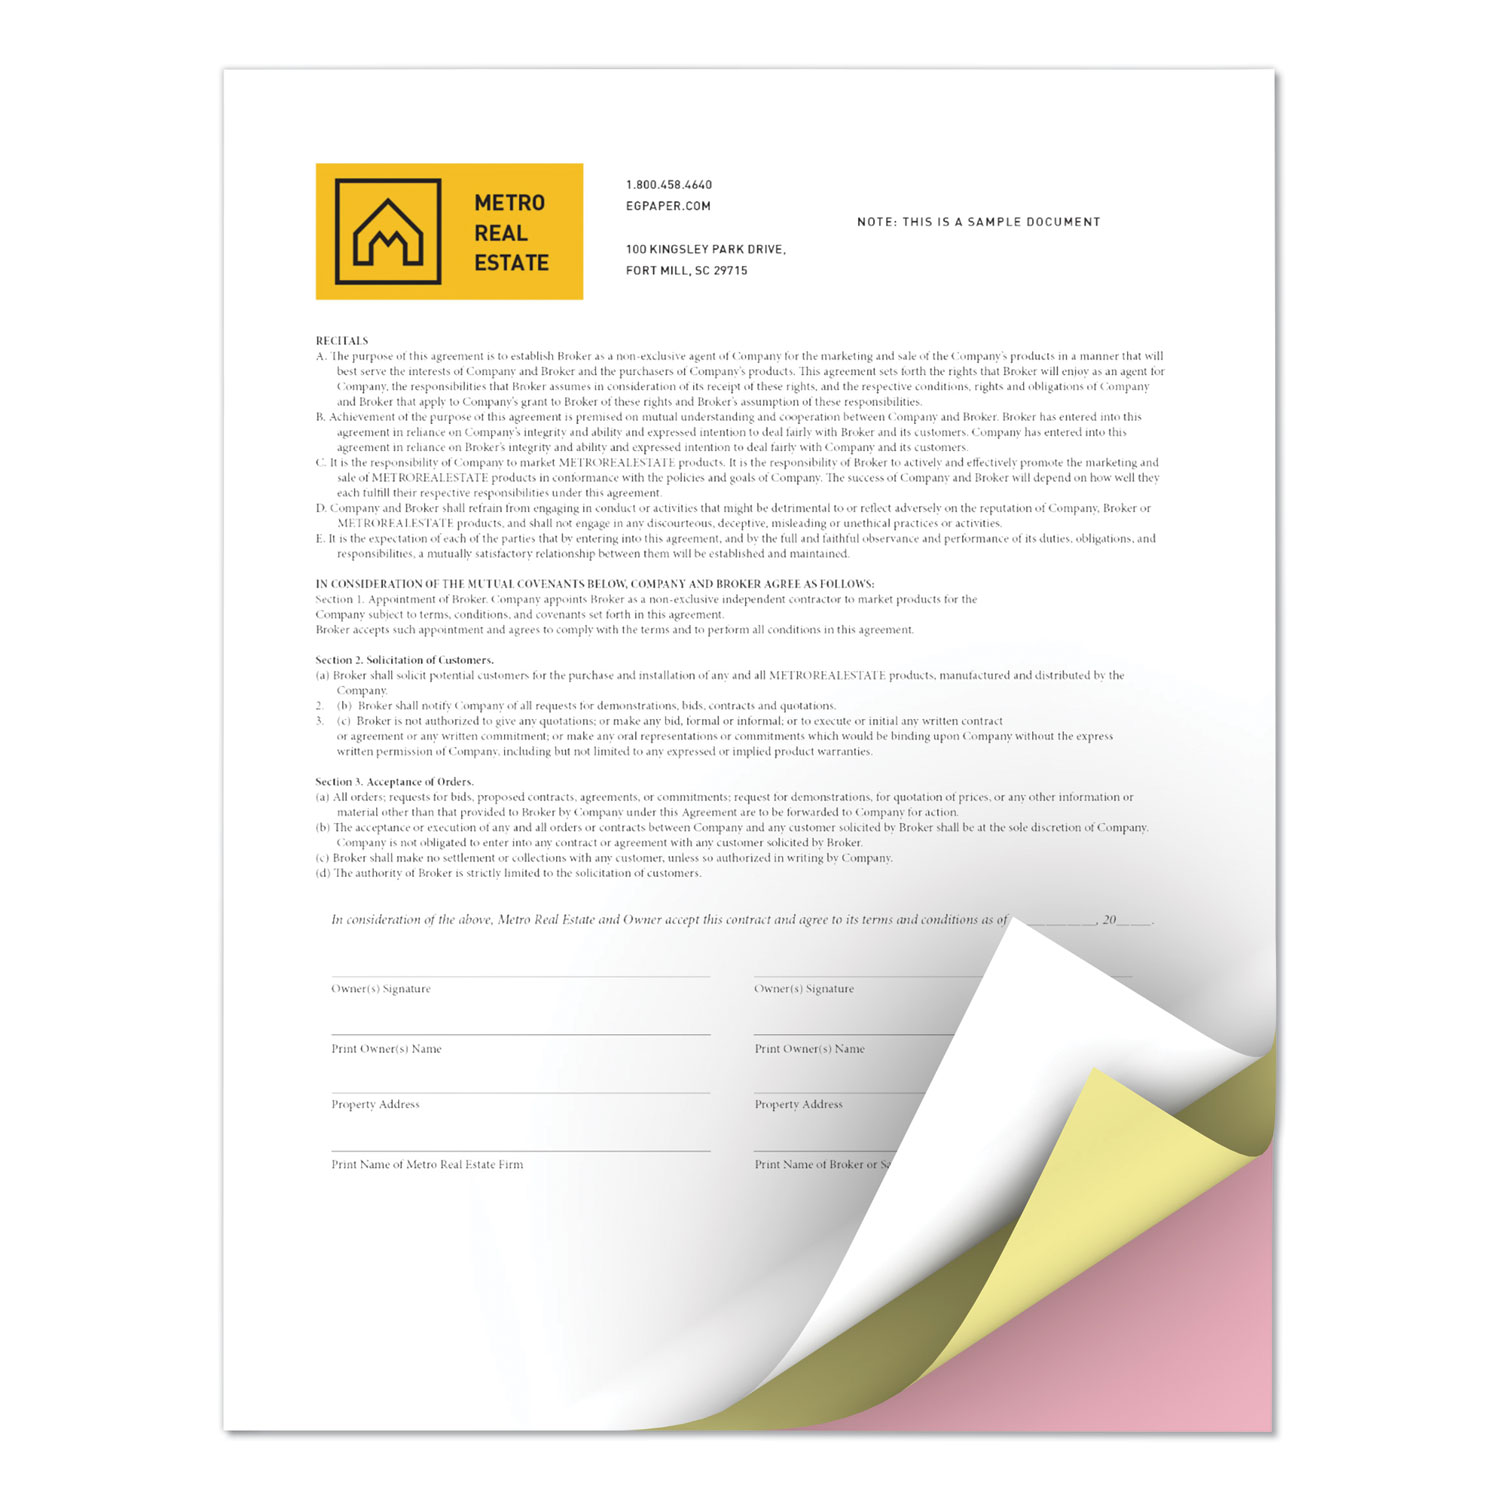 Revolution Carbonless 3-Part Paper, 8.5 x 11, White/Canary/Pink, 5, 000/Carton